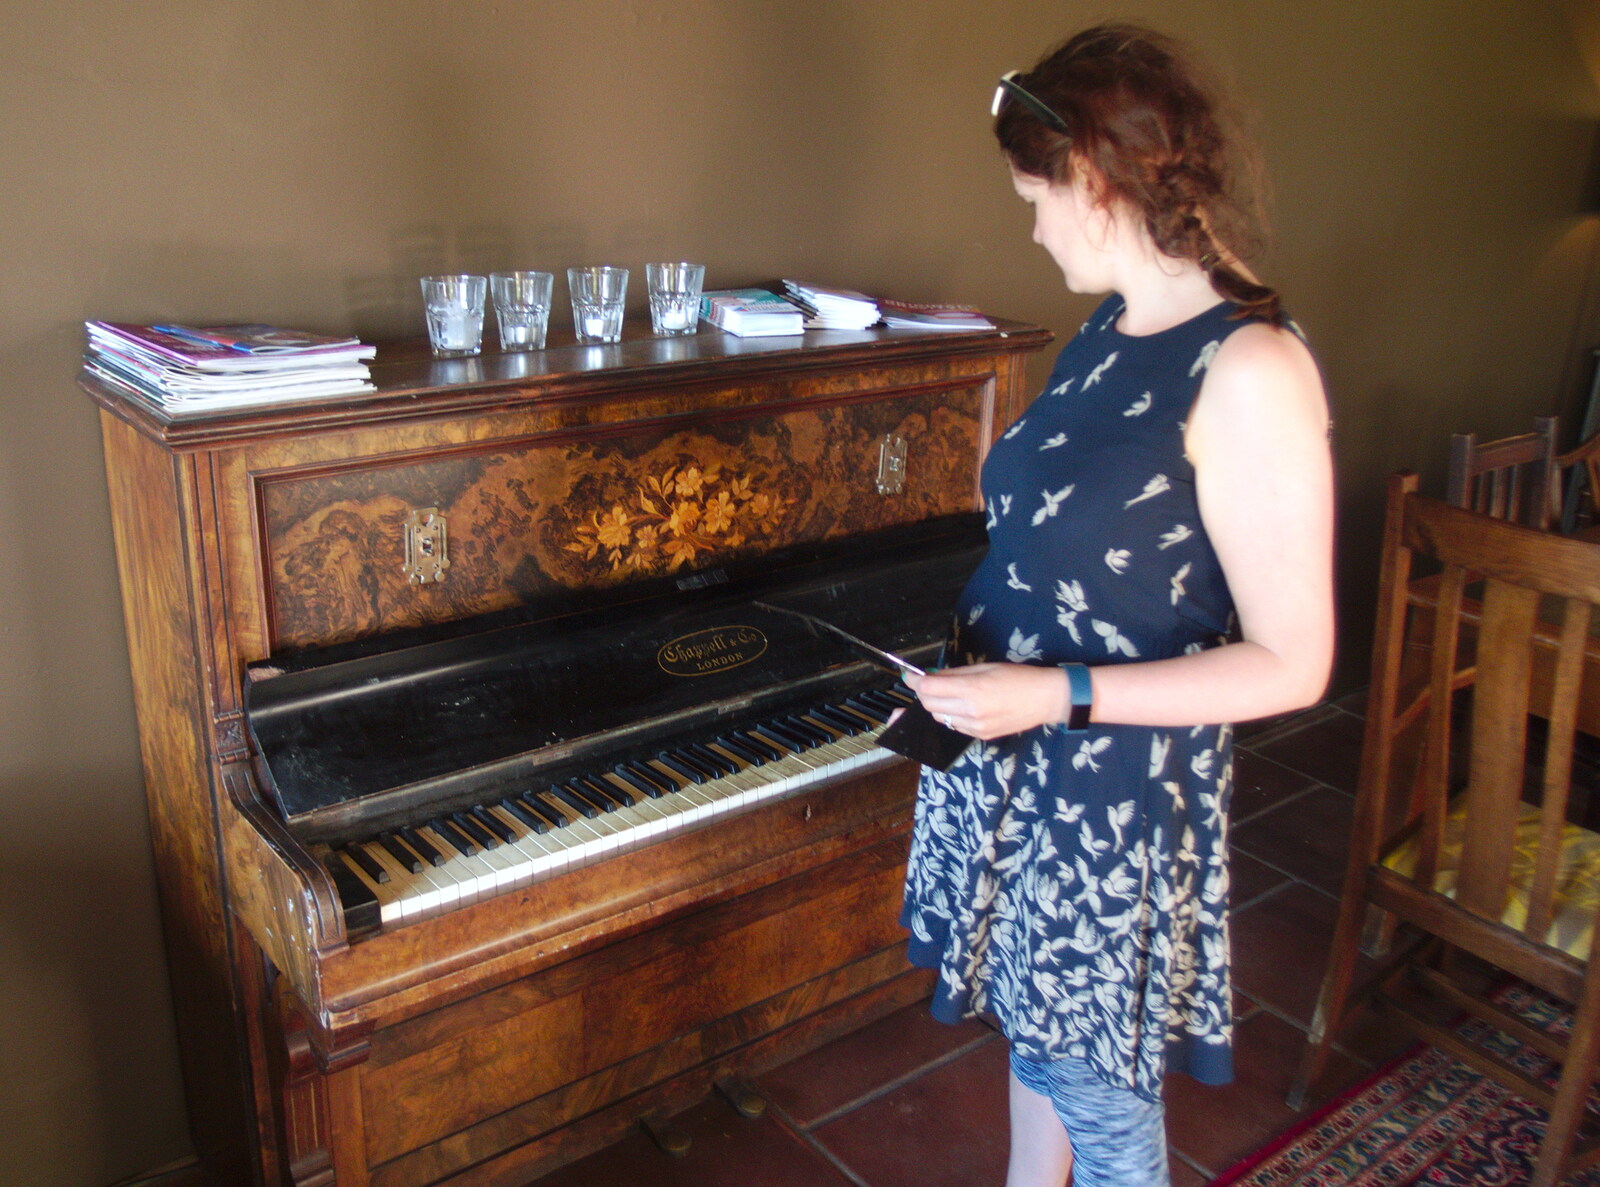 Isobel plays piano from Camping at Three Rivers, Geldeston, Norfolk - 1st June 2019